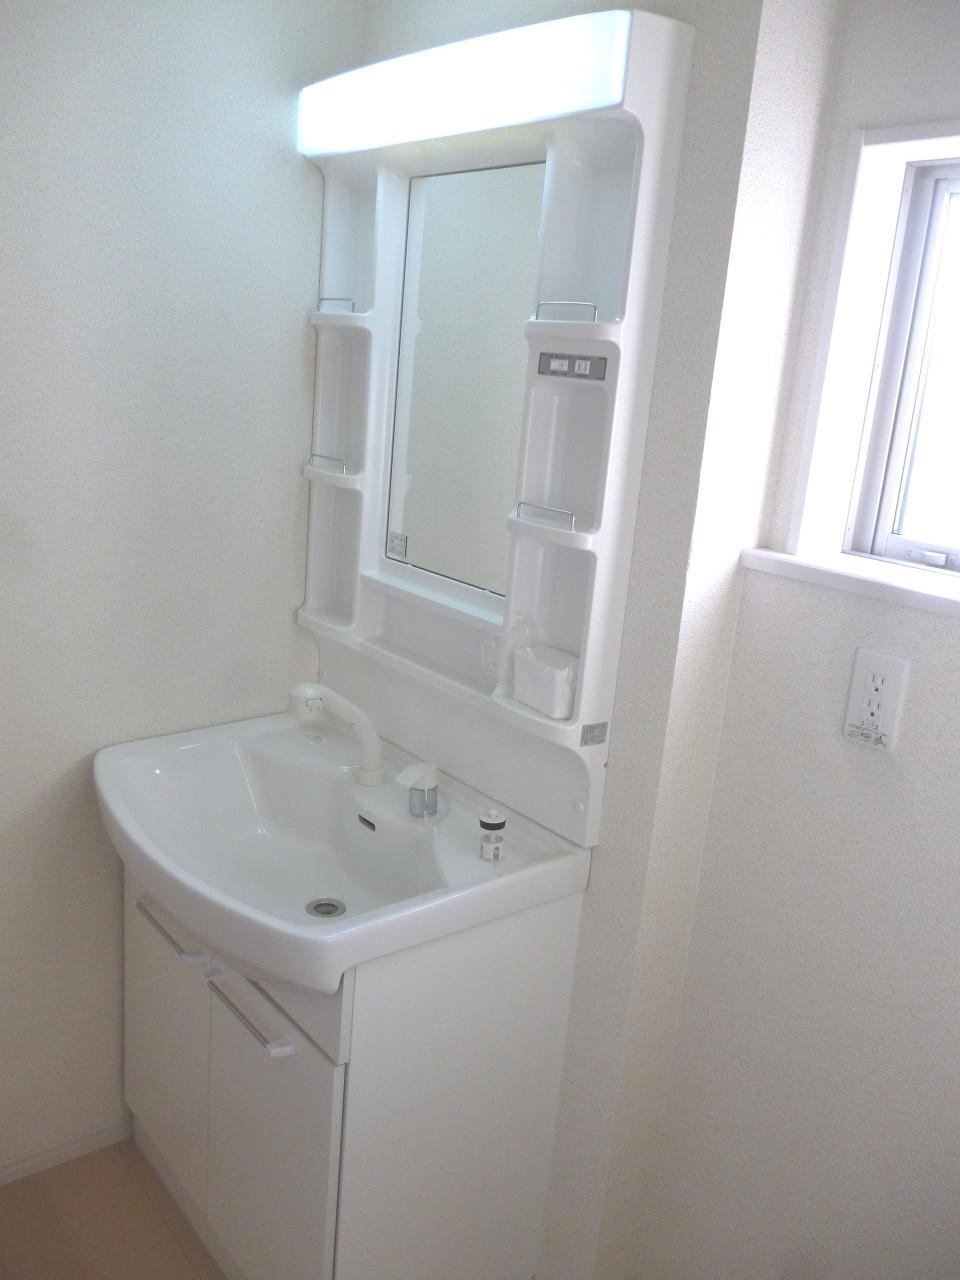 Wash basin, toilet. 1 Building Vanity with shower